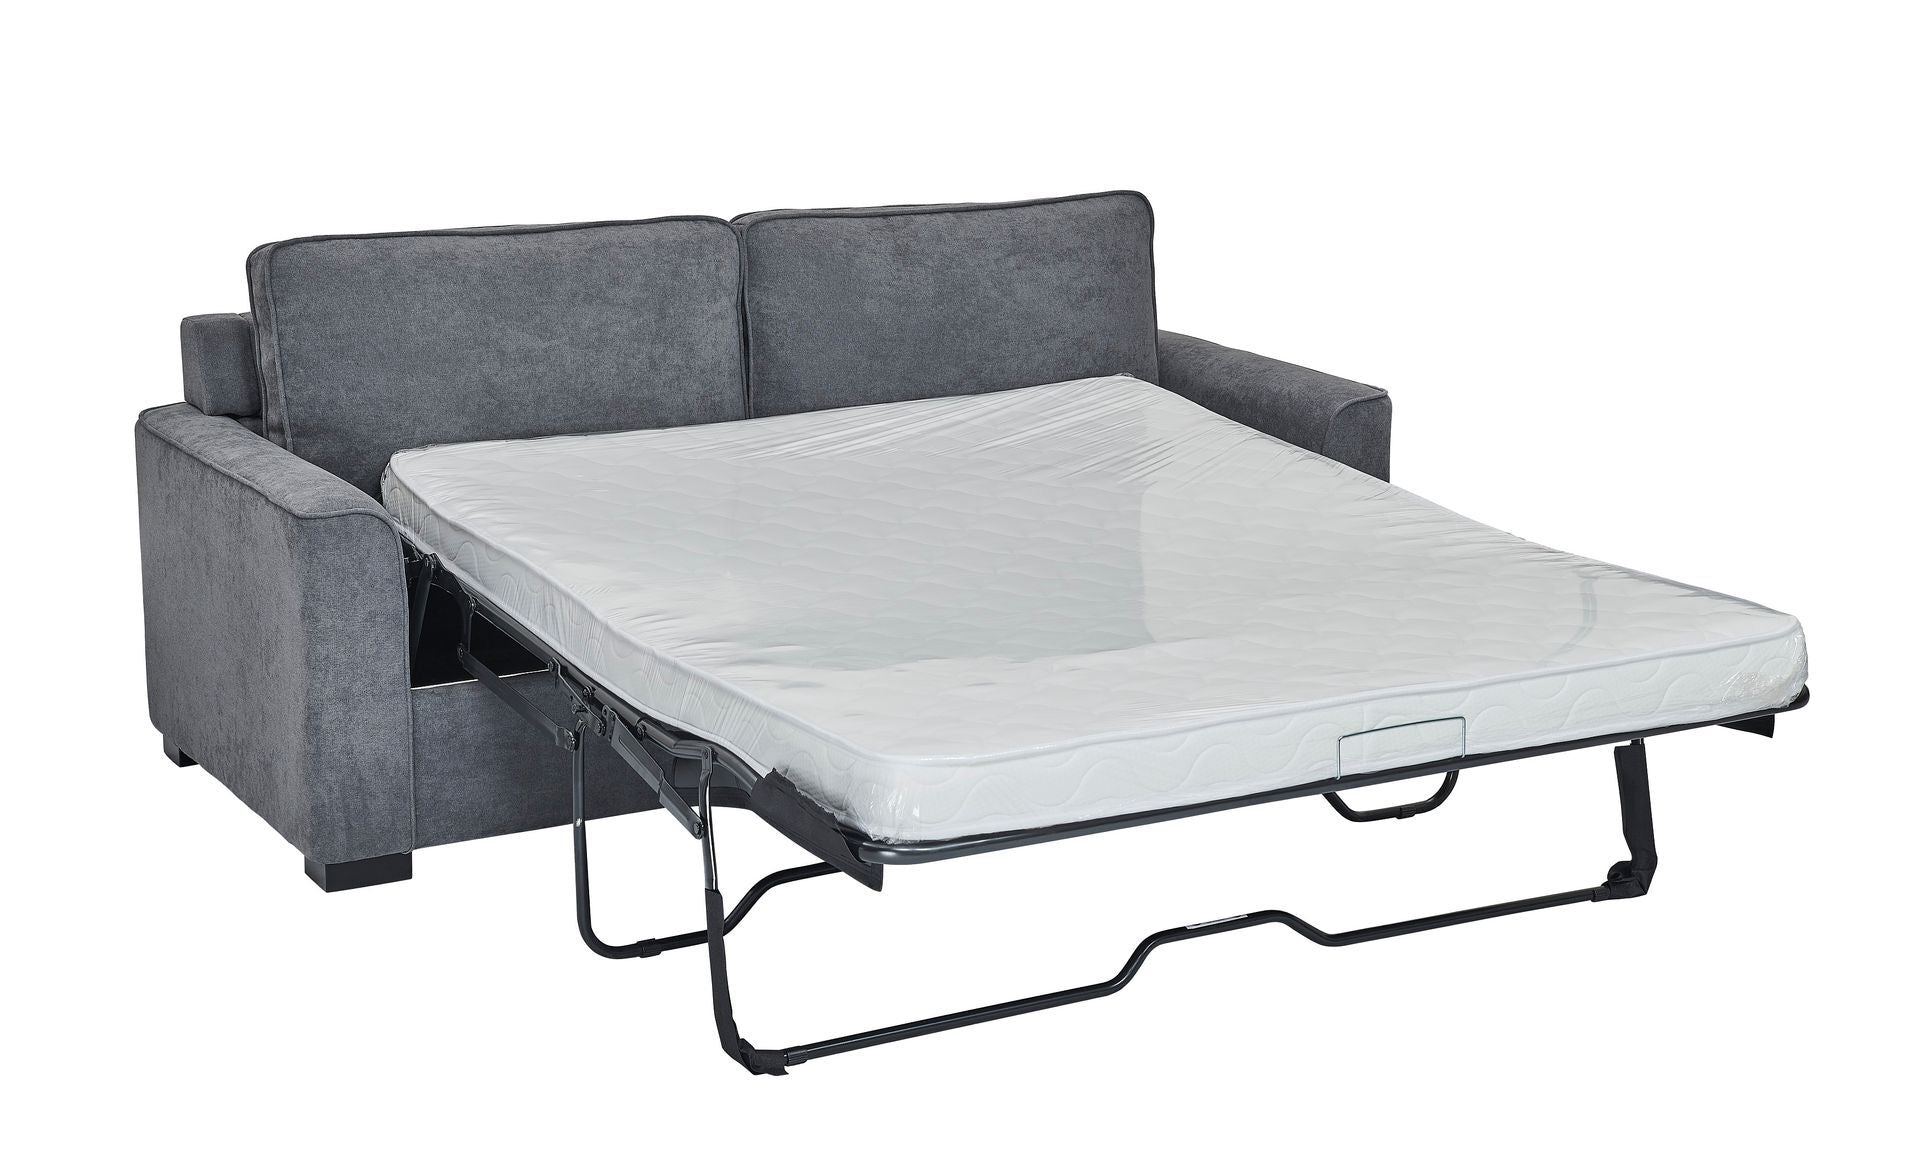 Misty 2 Seater Sofa Bed- Queen Size